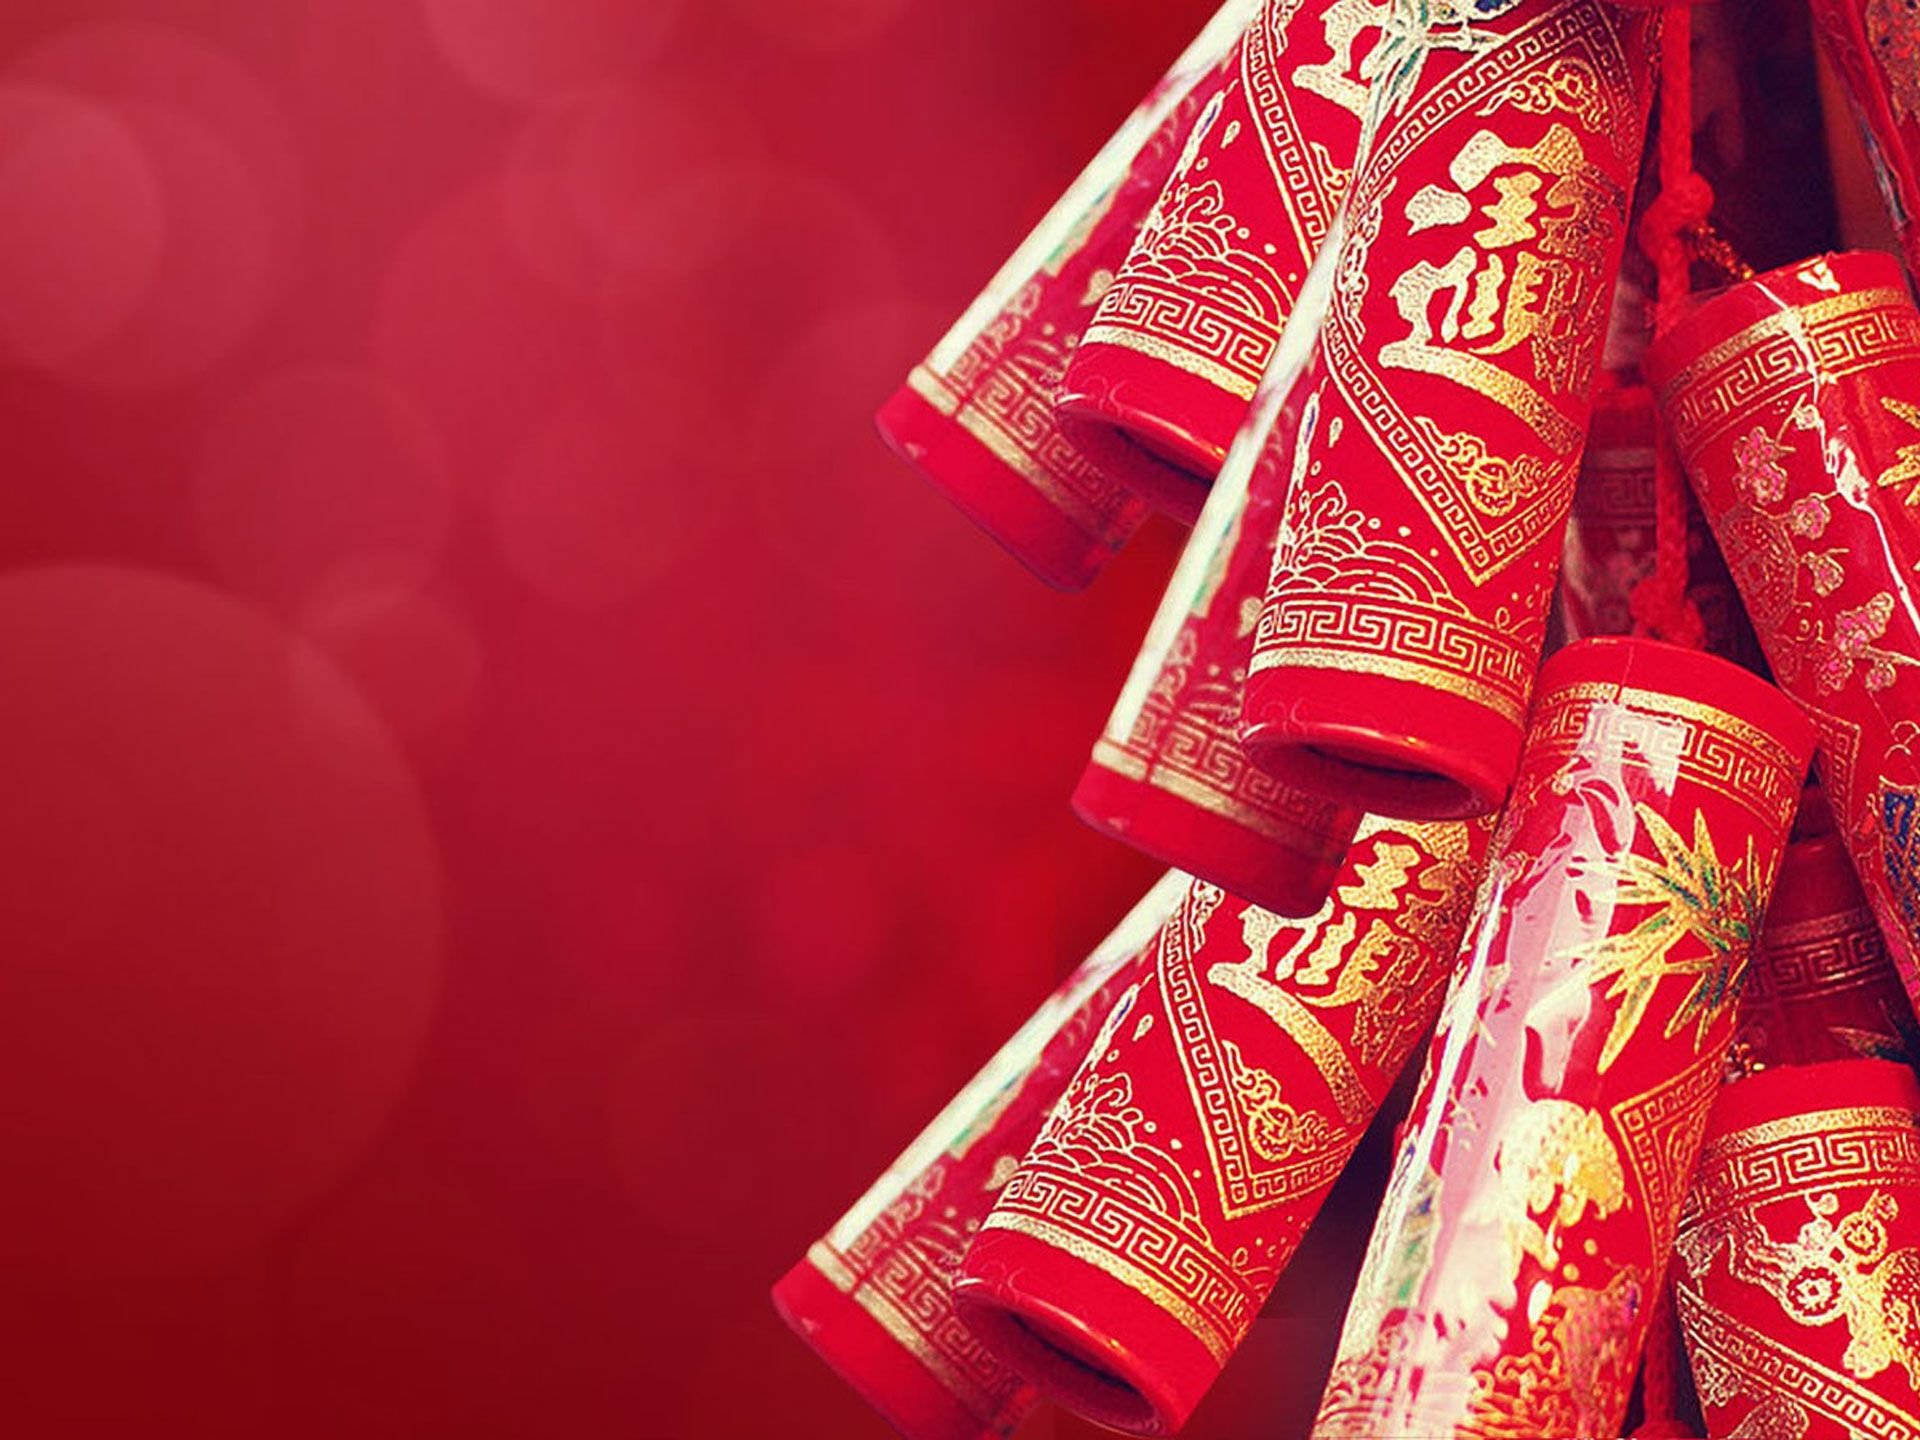 Chinese New Year wallpaper HD for desktop background